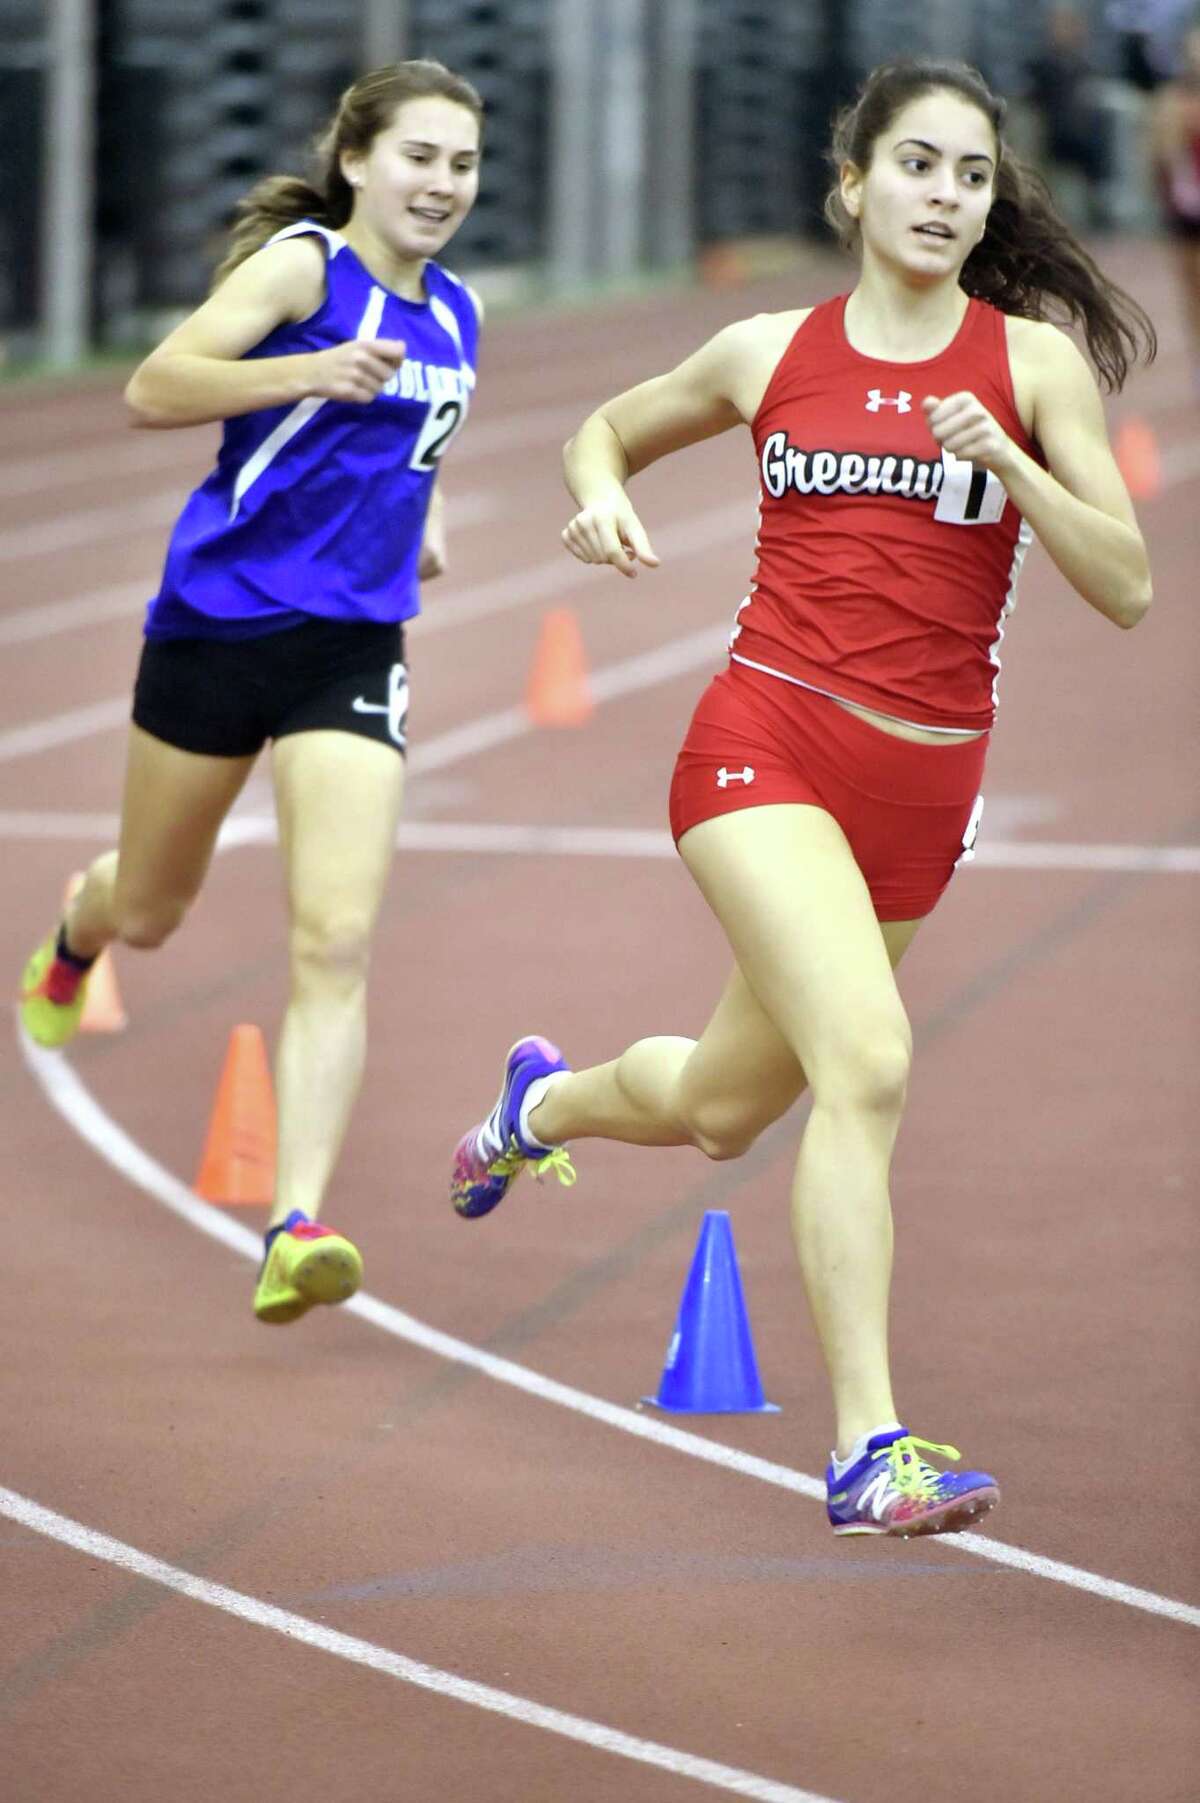 New Haven, Connecticut - Saturday, February 10, 2018: Girls 1000 meter run winner Emily Philippides of Greenwich H.S., right, runs ahead of eventual third place winner Alyssa Kraus of Fairfield-Ludlowe H.S. during the 2018 State Class LL Girls and Boys Indoor Track and Field Championship at the Floyd Little Athletic Center in New Haven .